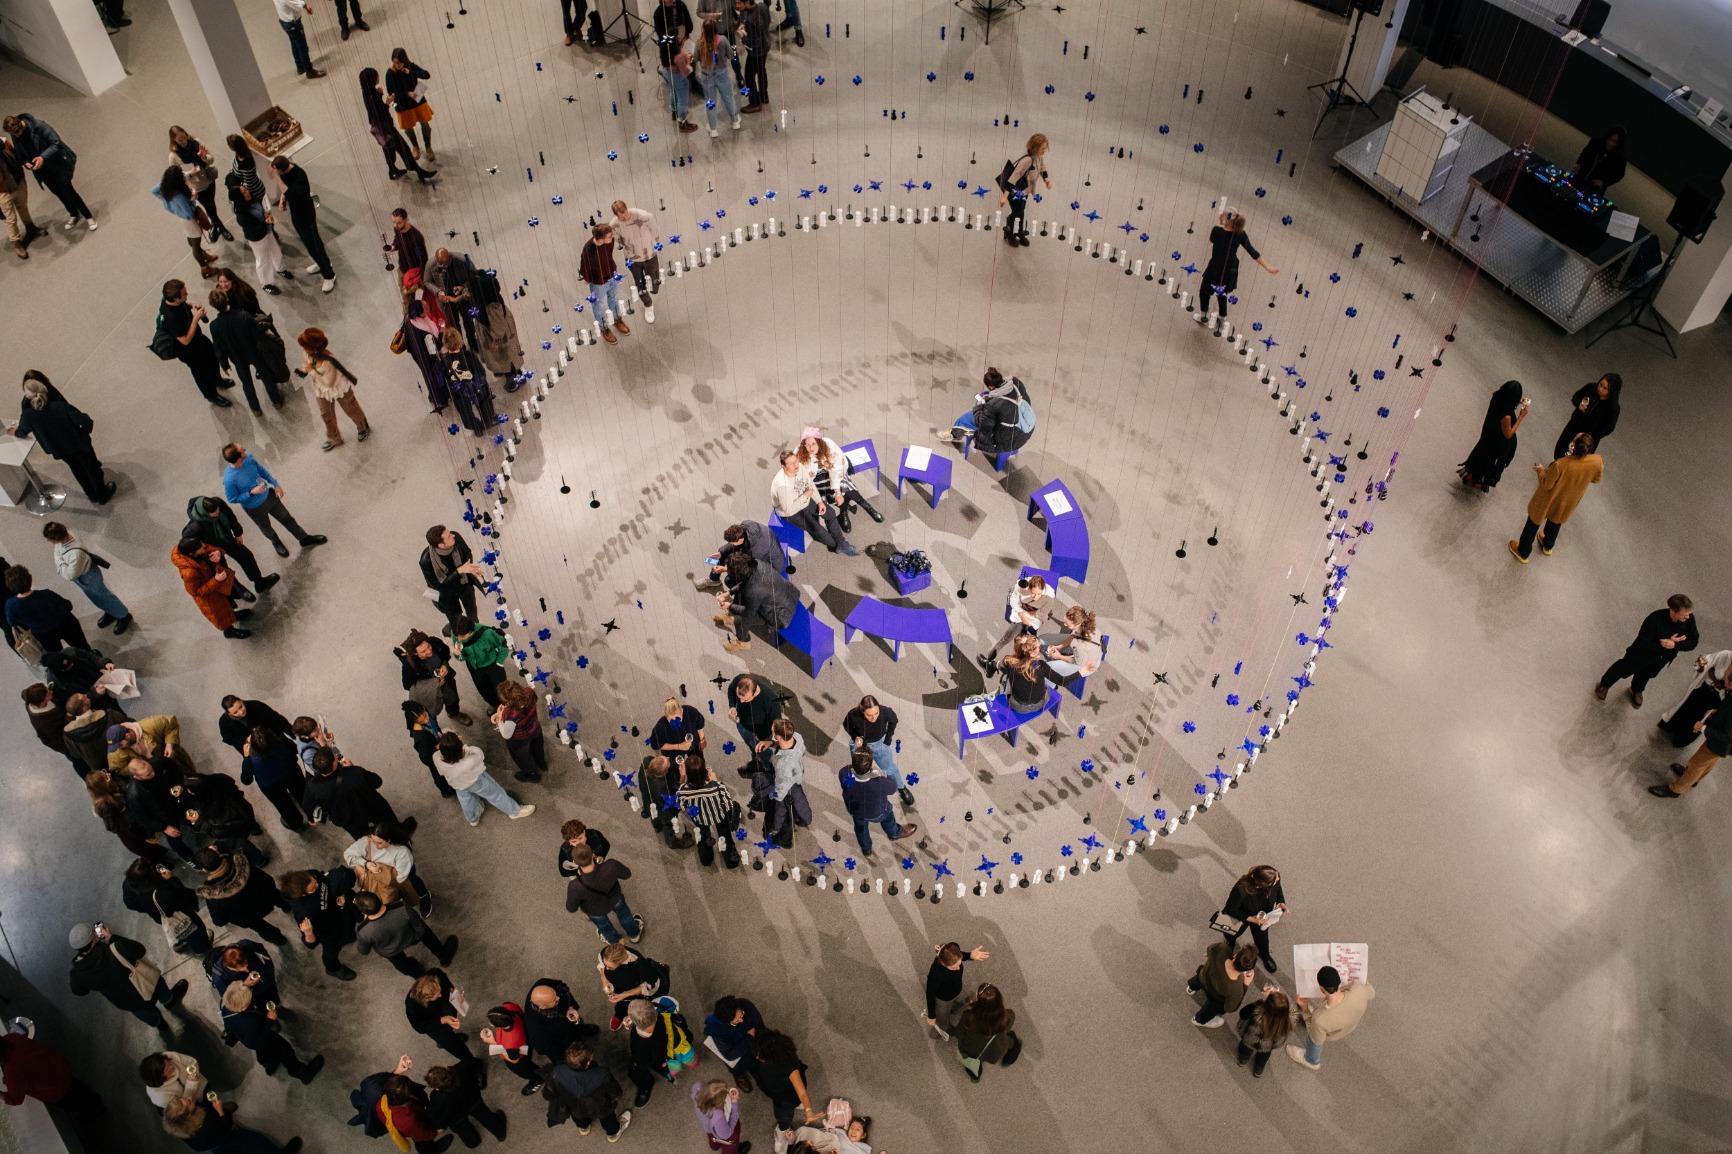 Photo of artwork. Artwork is a transparent beaded hanging curtain of 16m in a circular form creating an interior. The interior has blue benches that when put together form a circle. The curtain beads are blue, white and black. The strings are blue and pink. There are people sitting on the bench listening with earphones to a soundscape. There are people standing outside and inside the curtain. The image is taken during the opening evening.